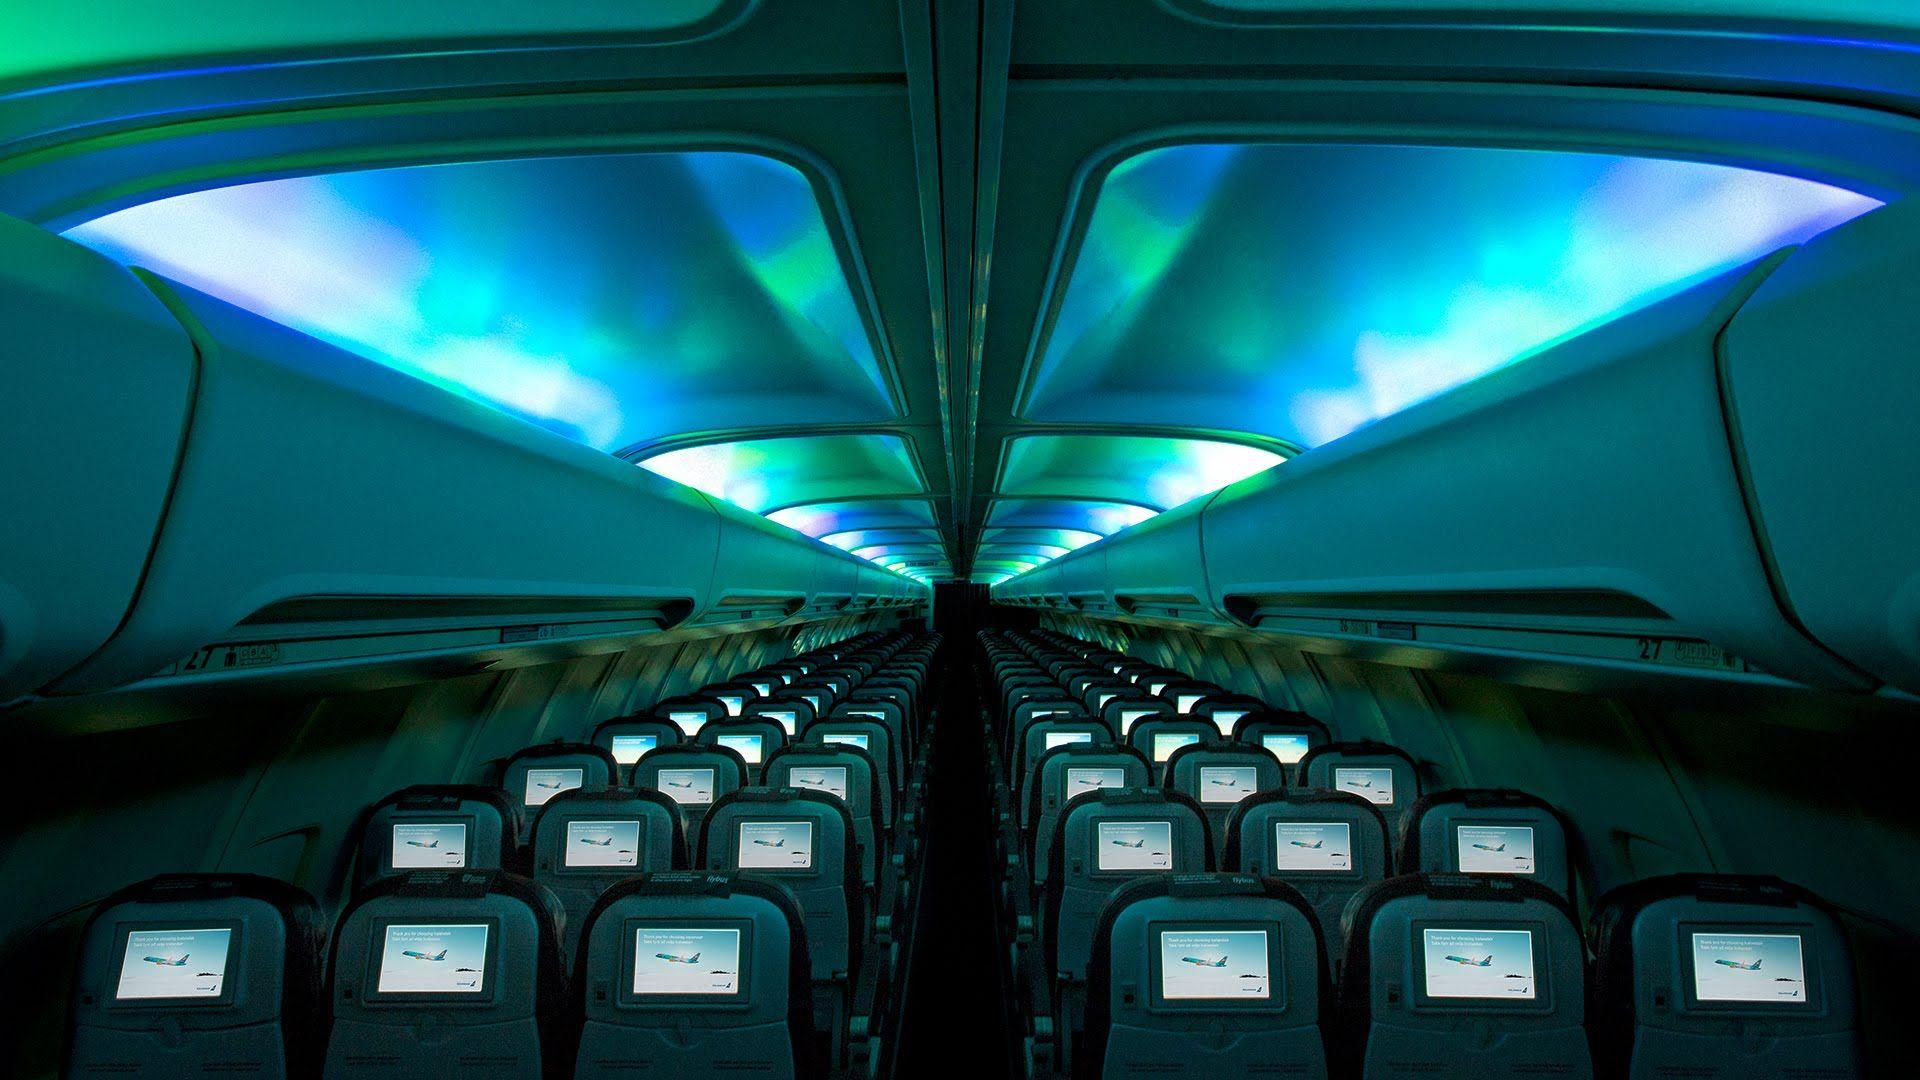 Have you seen inside the world's first northern lights plane?